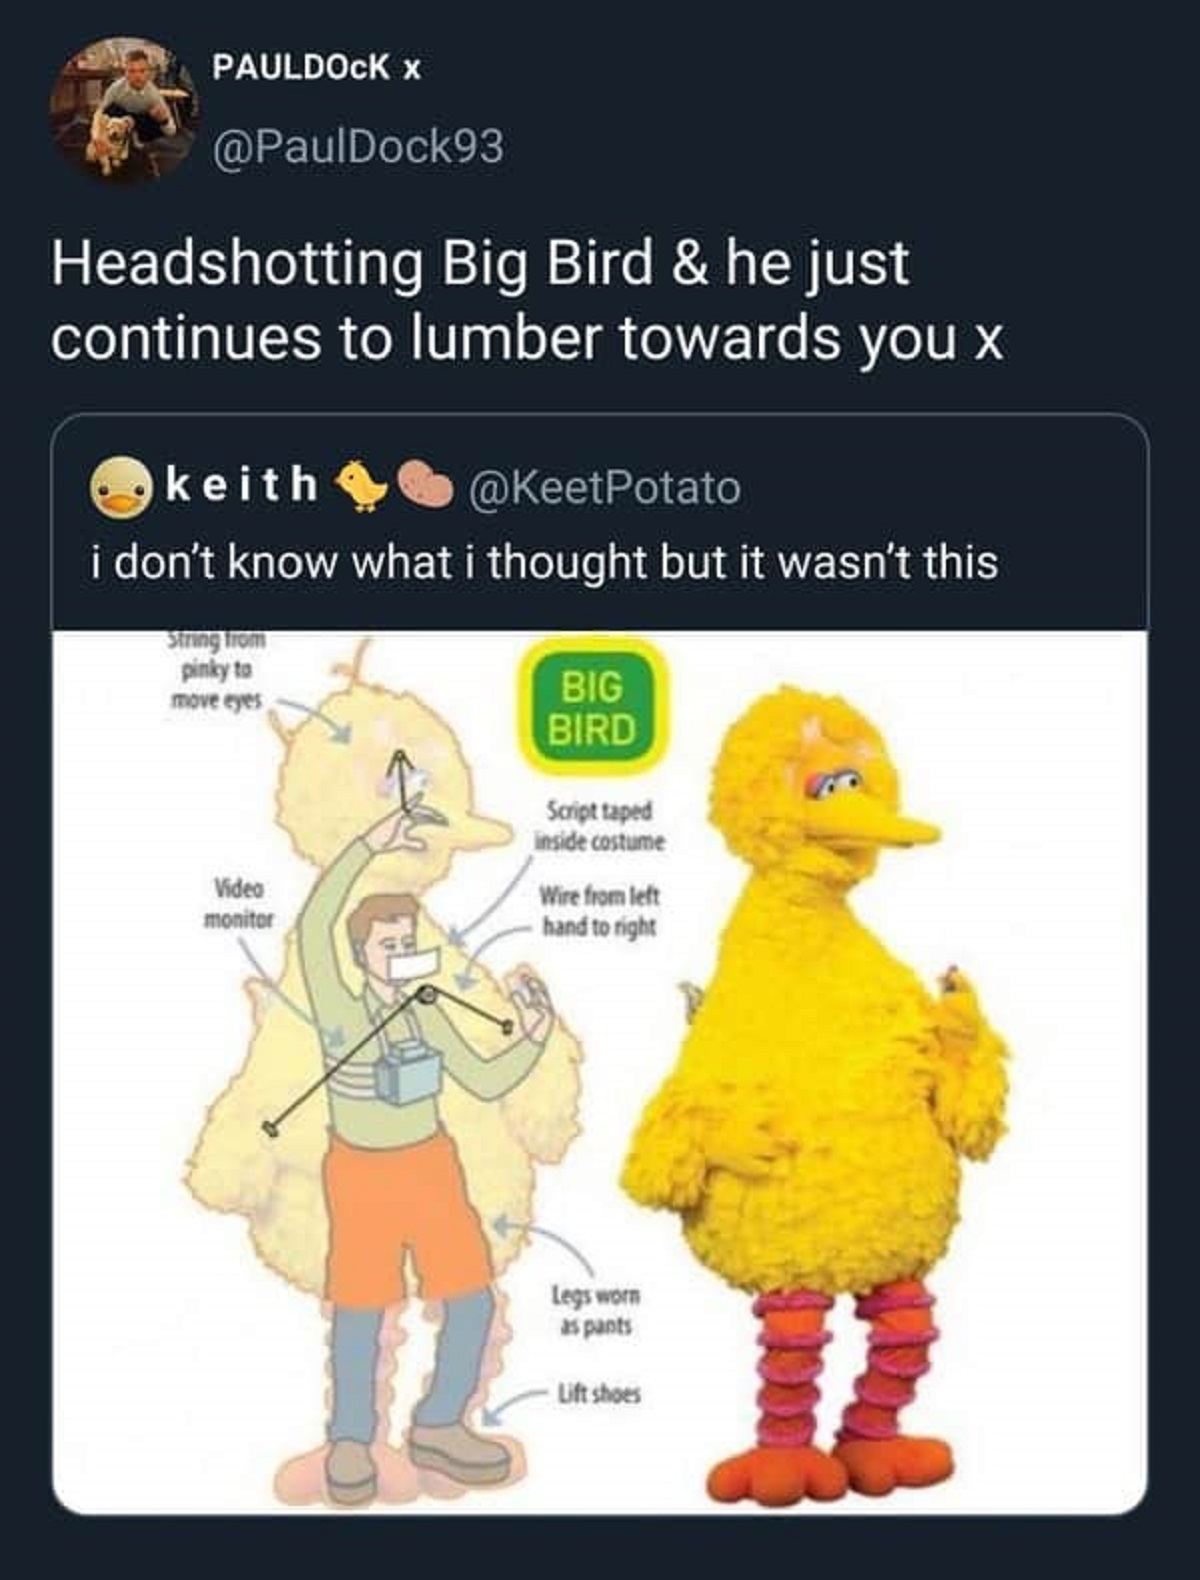 funny big bird - Pauldock X Headshotting Big Bird & he just continues to lumber towards you x keith i don't know what i thought but it wasn't this String from pinky to move eyes Big Bird Script taped inside costume Video monitor Wire from left hand to rig